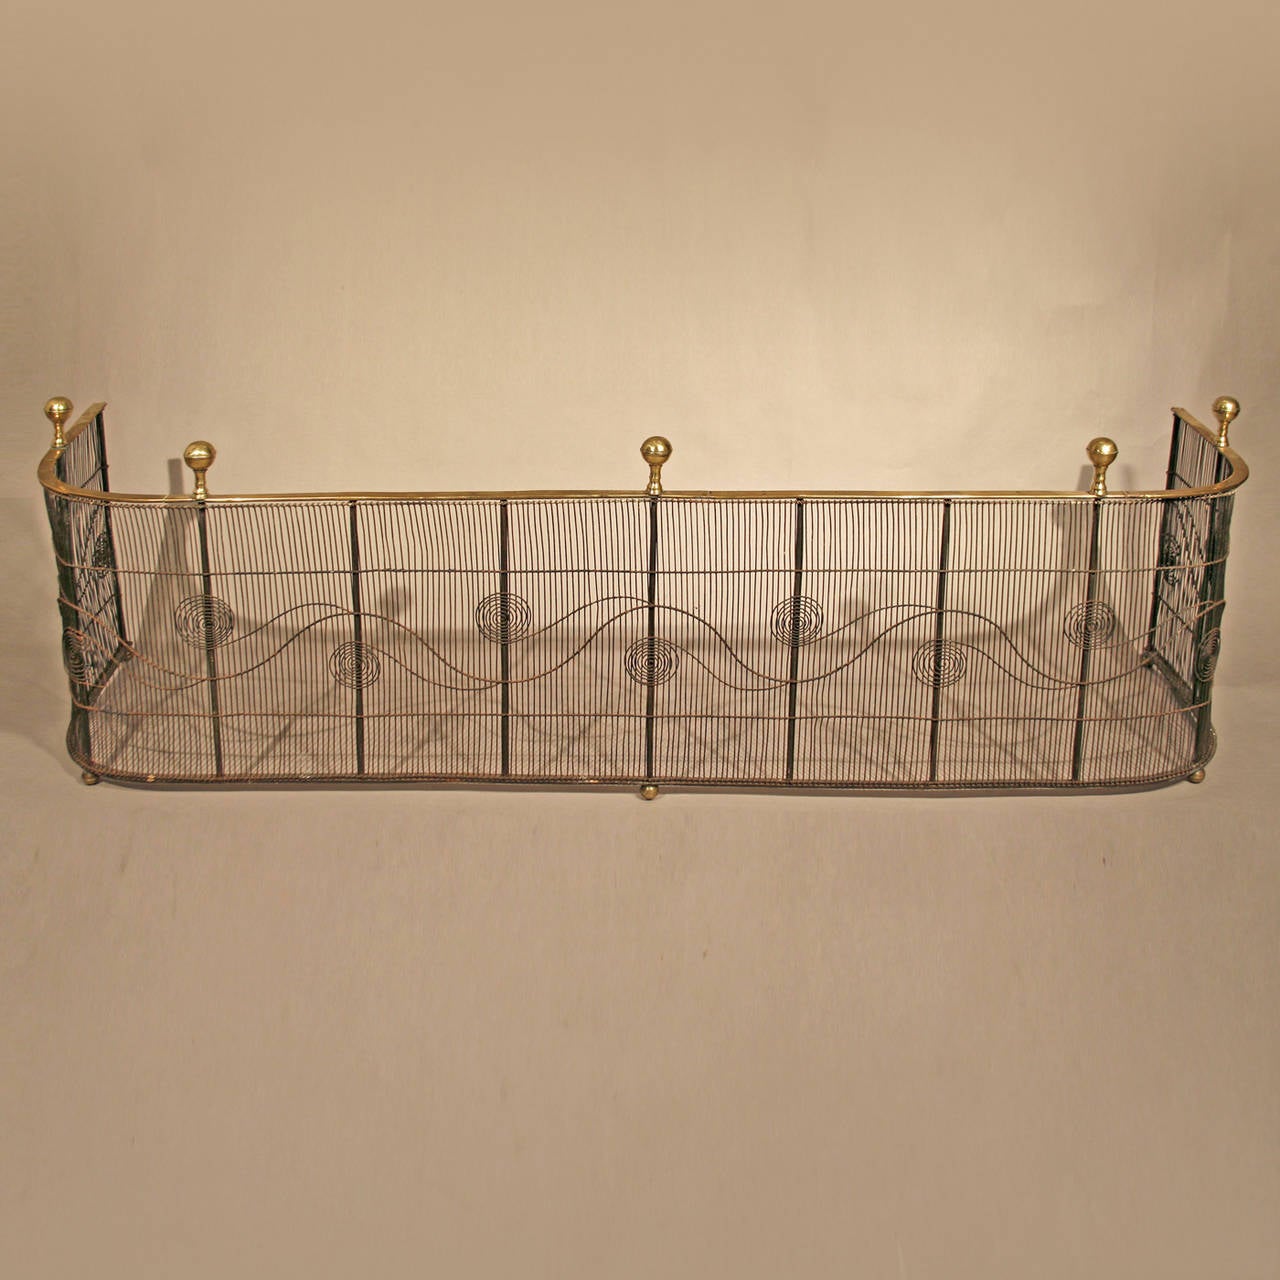 Late Federal wirework fender.
American, circa 1820.
Brass, rounded posts, forged iron, wirework.

This fully developed fender is adorned with rounded brass finials above a brass rail above intricate wire work with scroll motifs supported by